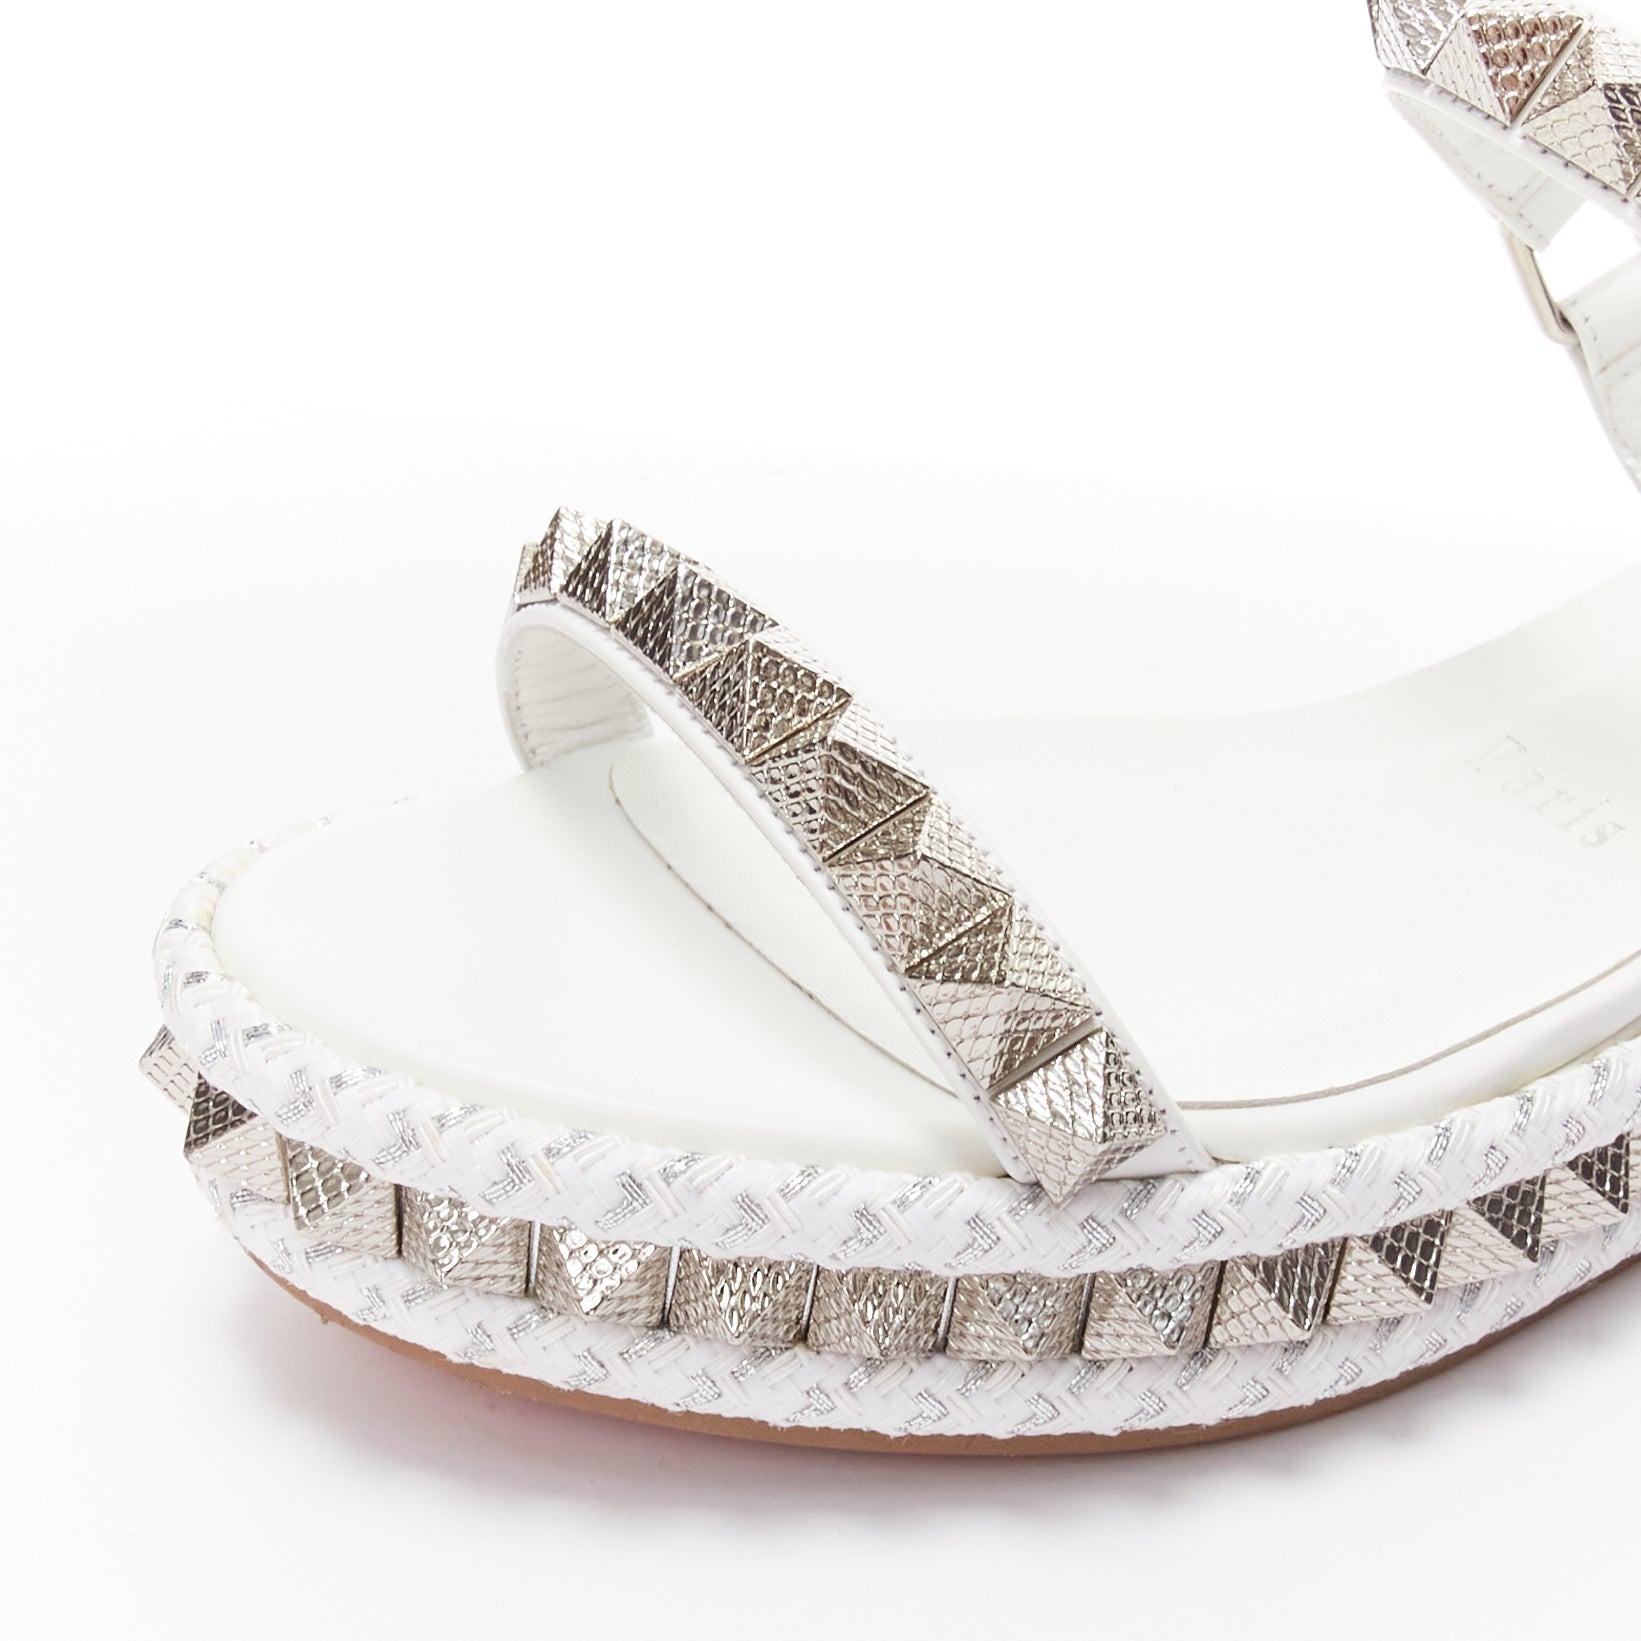 CHRISTIAN LOUBOUTIN Pyraclou 60 white silver studded wedge sandals EU37
Reference: TGAS/D00859
Brand: Christian Louboutin
Model: Pyraclou 60
Material: Leather, Fabric
Color: White, Silver
Pattern: Solid
Closure: Ankle Strap
Lining: White